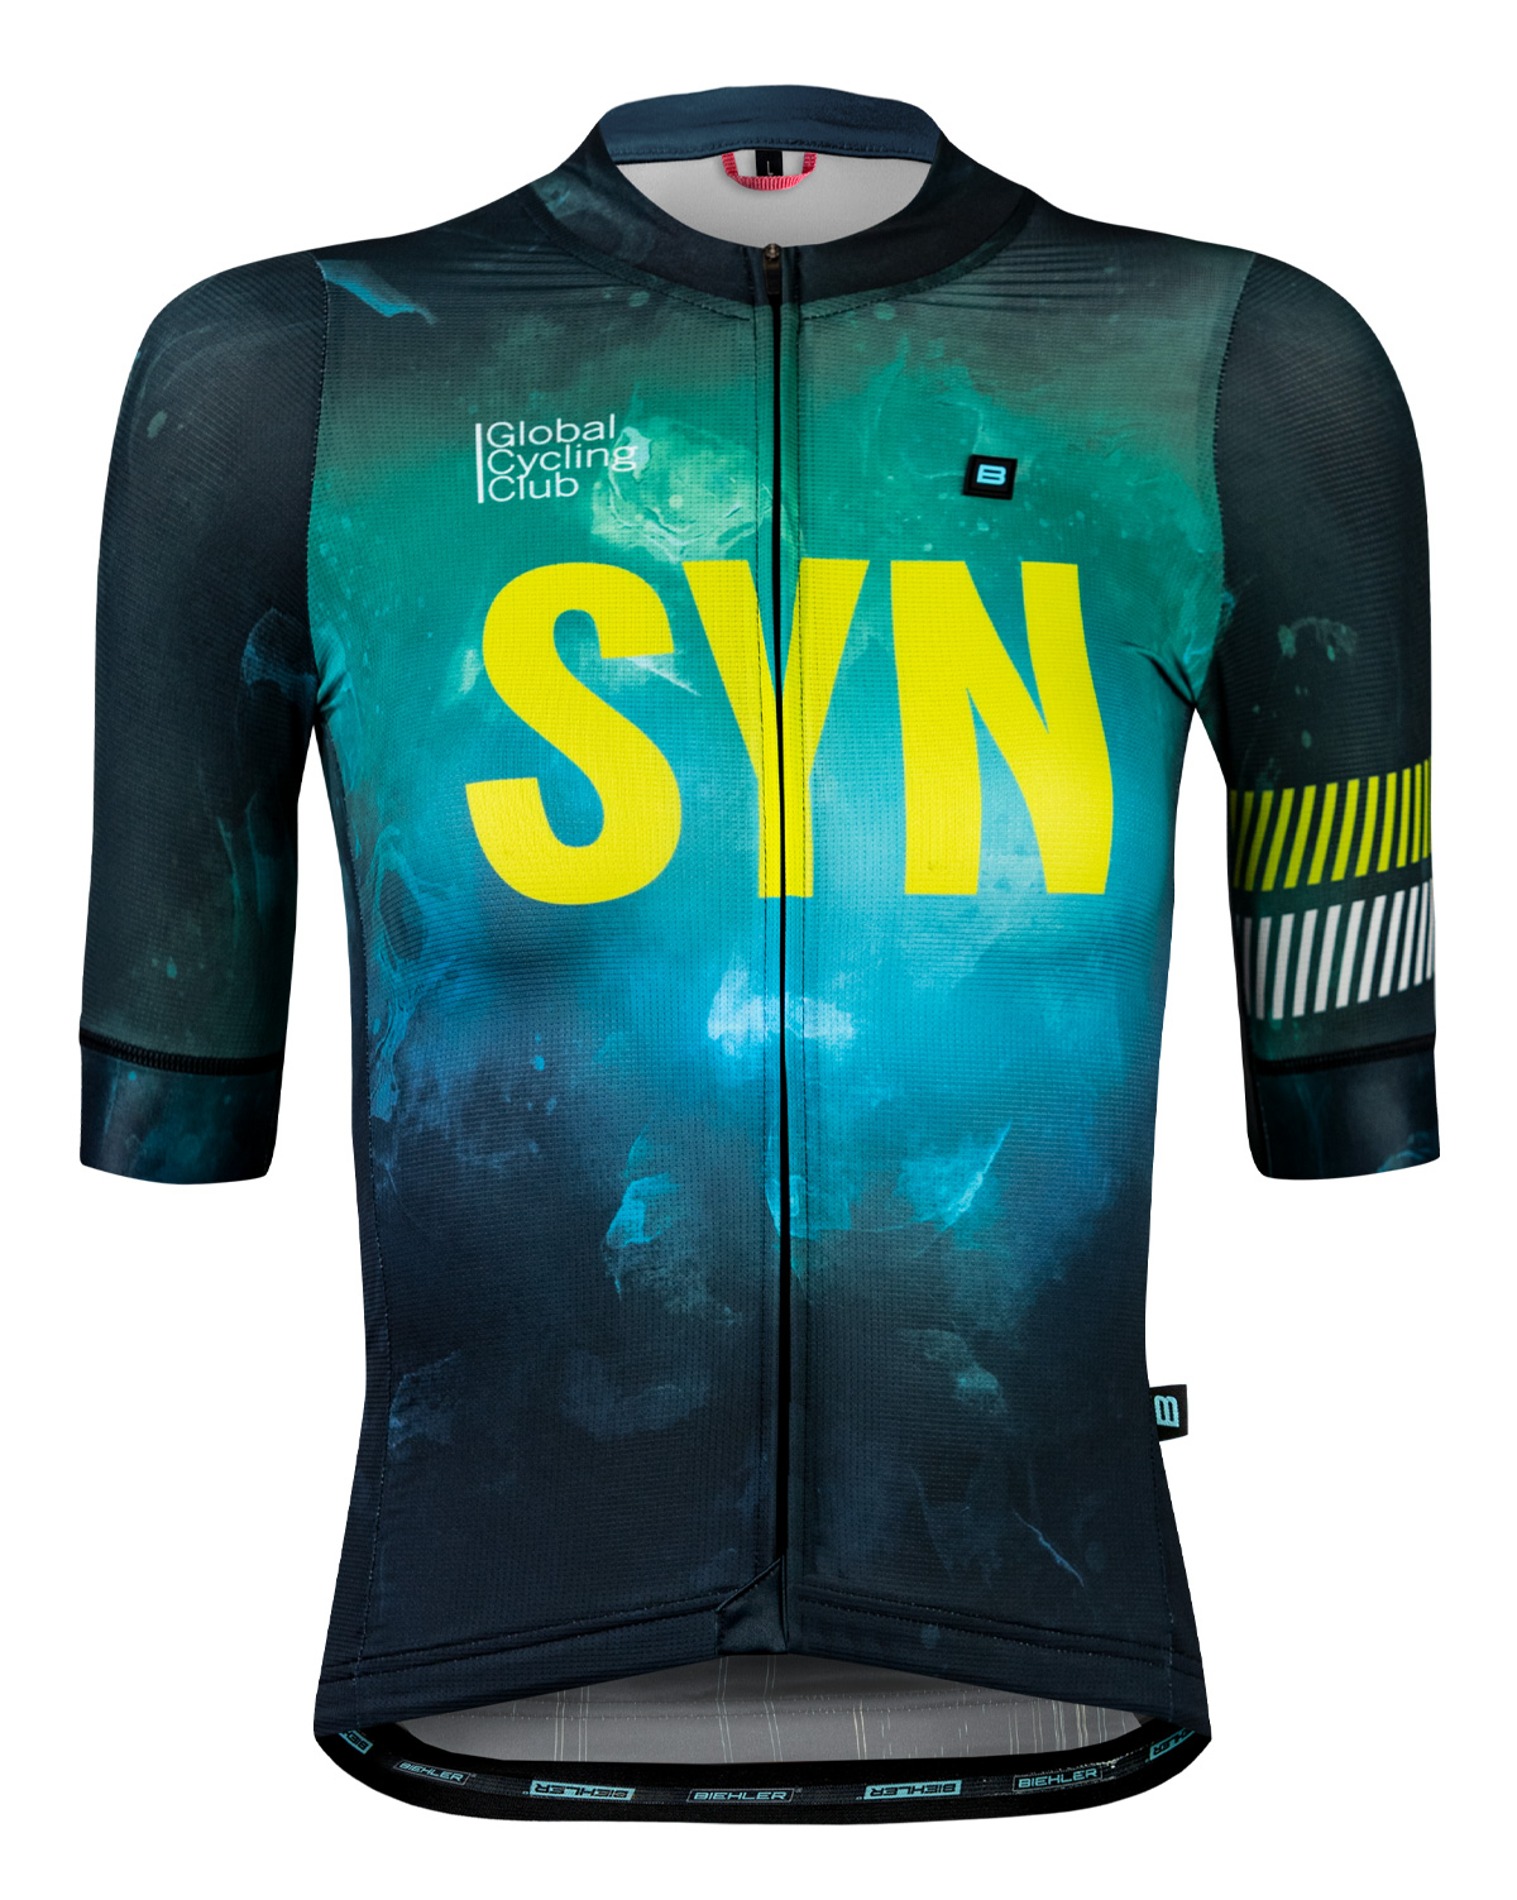 W SYNDICATE CLIMBER JERSEY NEON SPACE